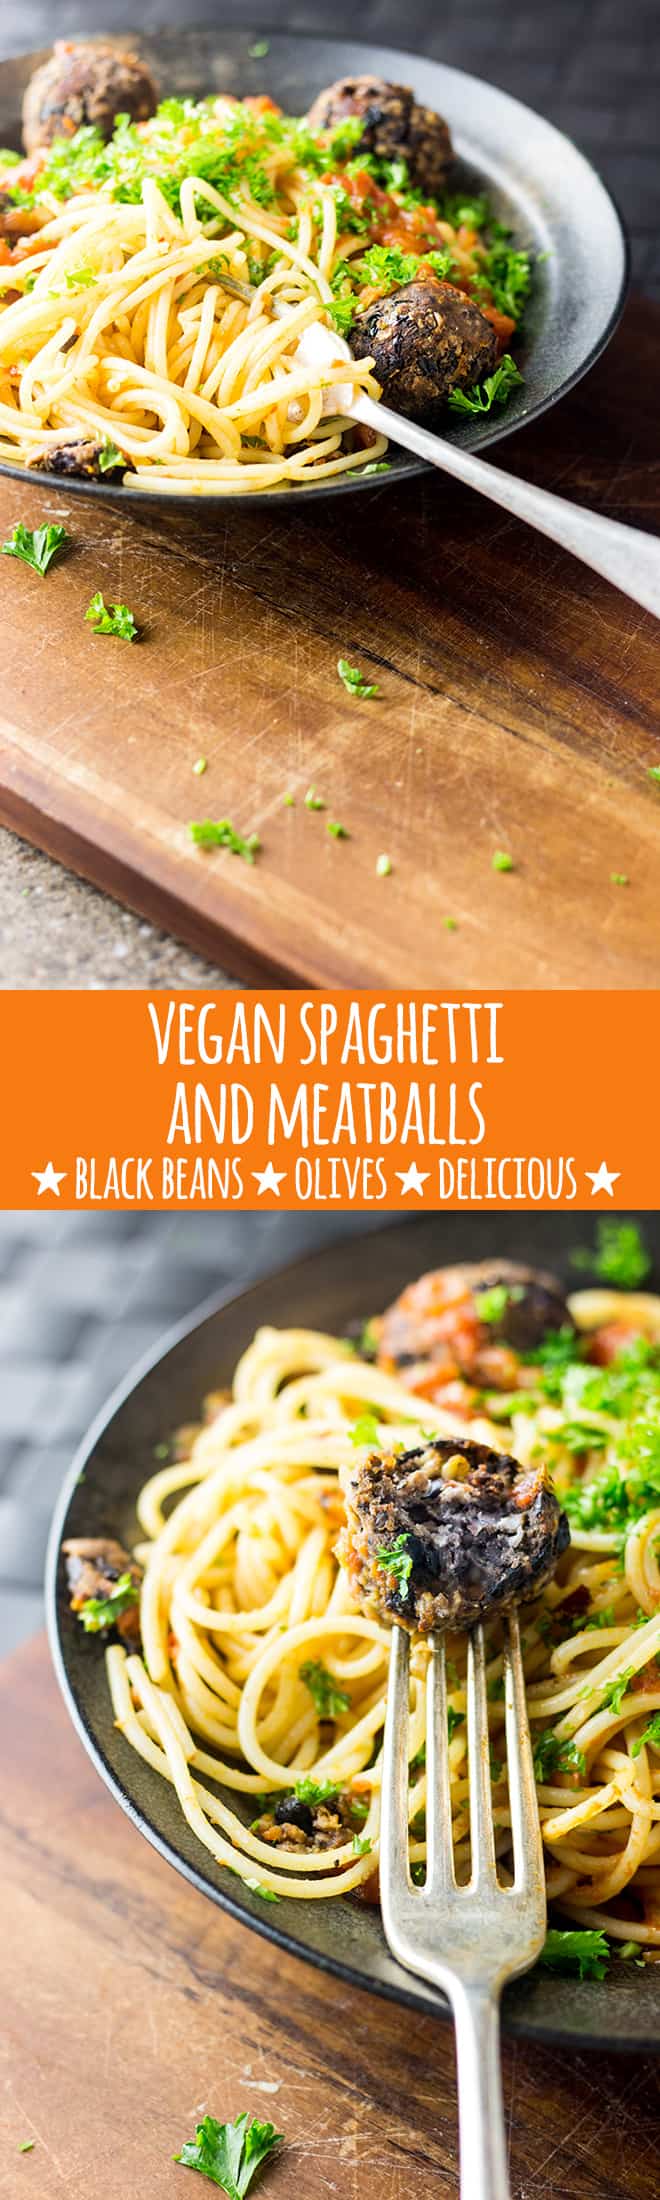 Black beans, black olives and sundried tomatoes make tasty vegan meatballs to enjoy with your favourite pasta and a cheeky glass of red. Vegan and gluten free. 